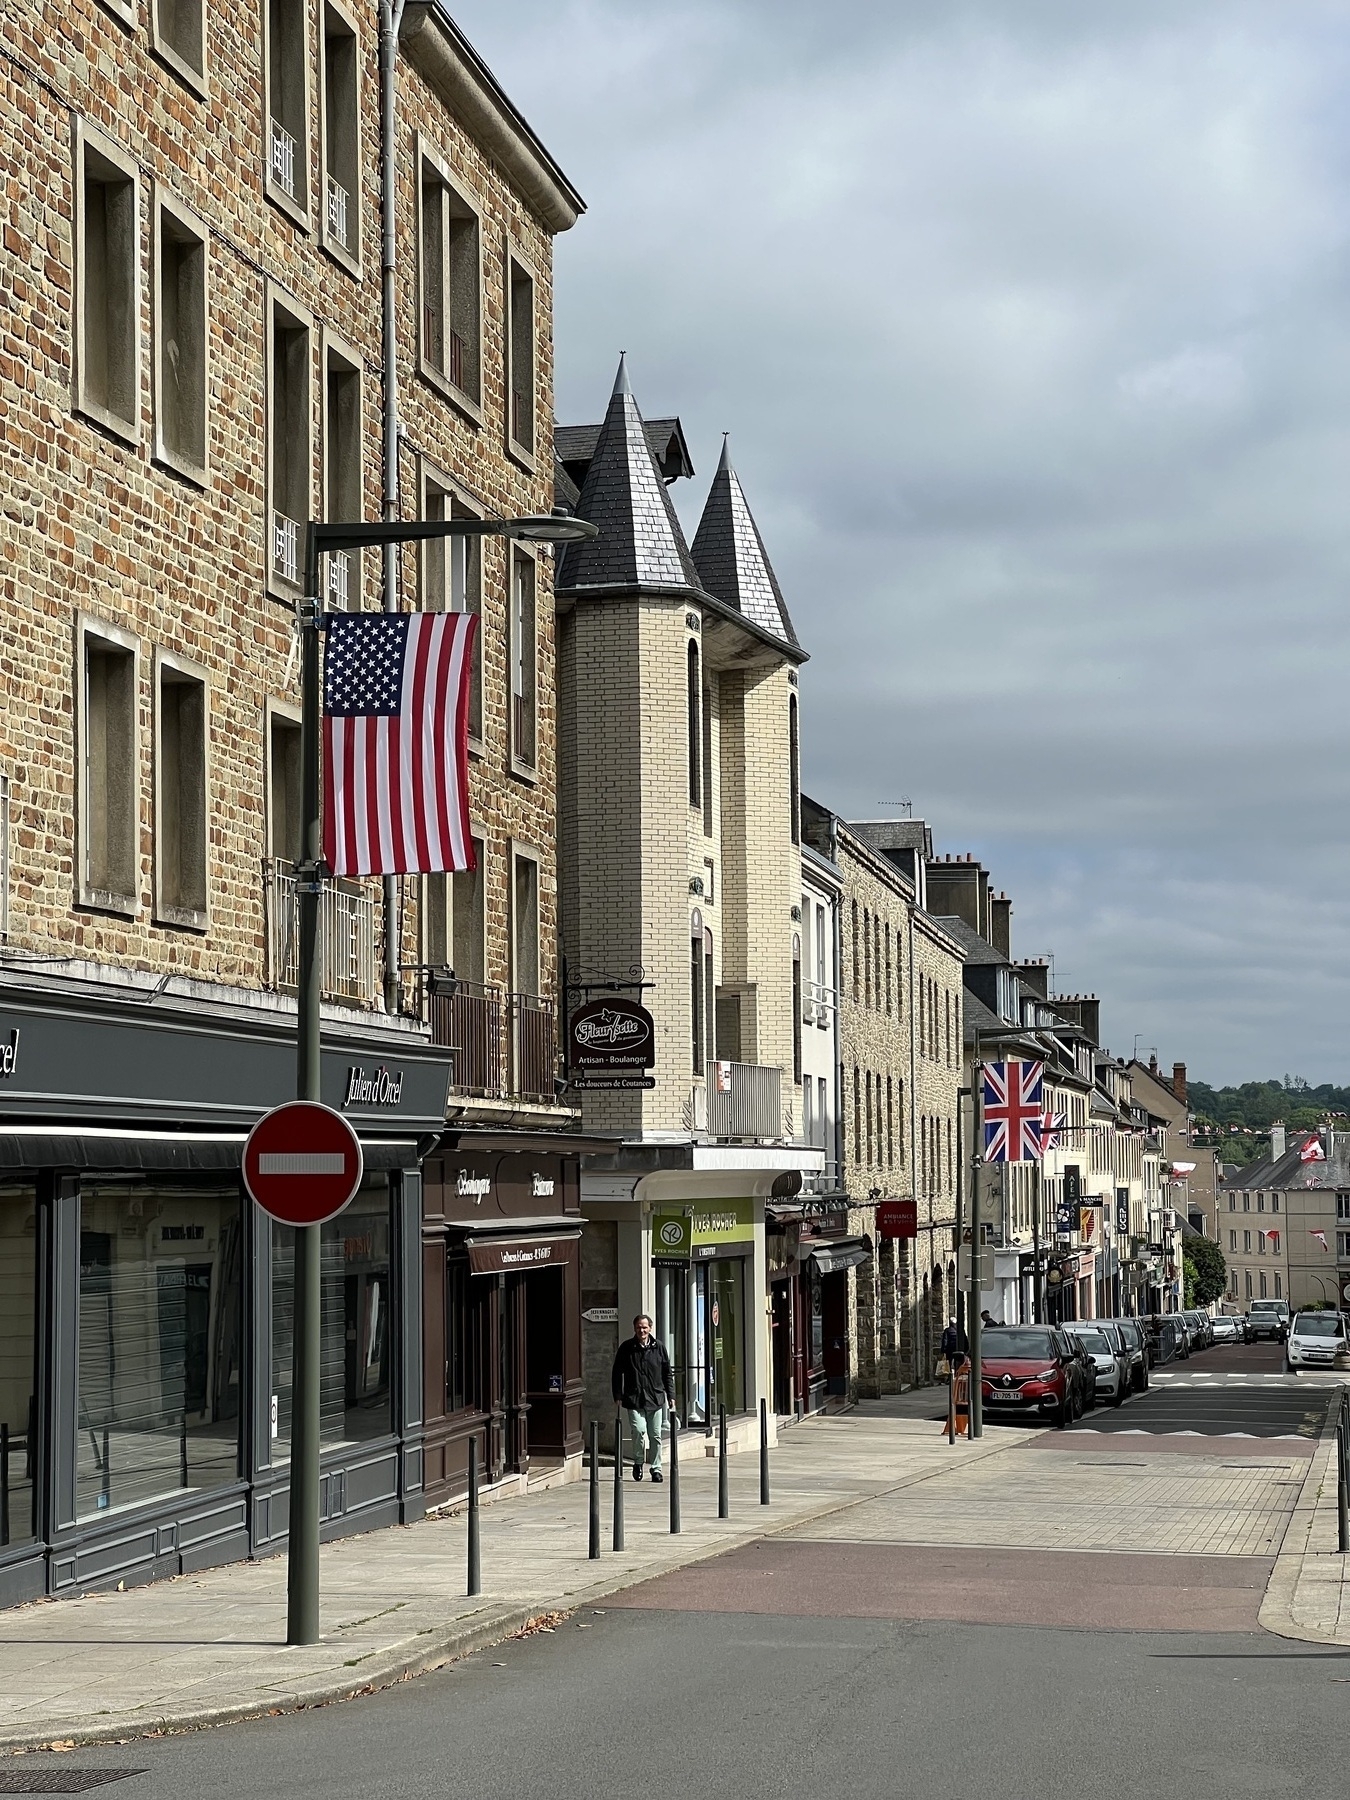 US and UK flags flying in a Normandy town.